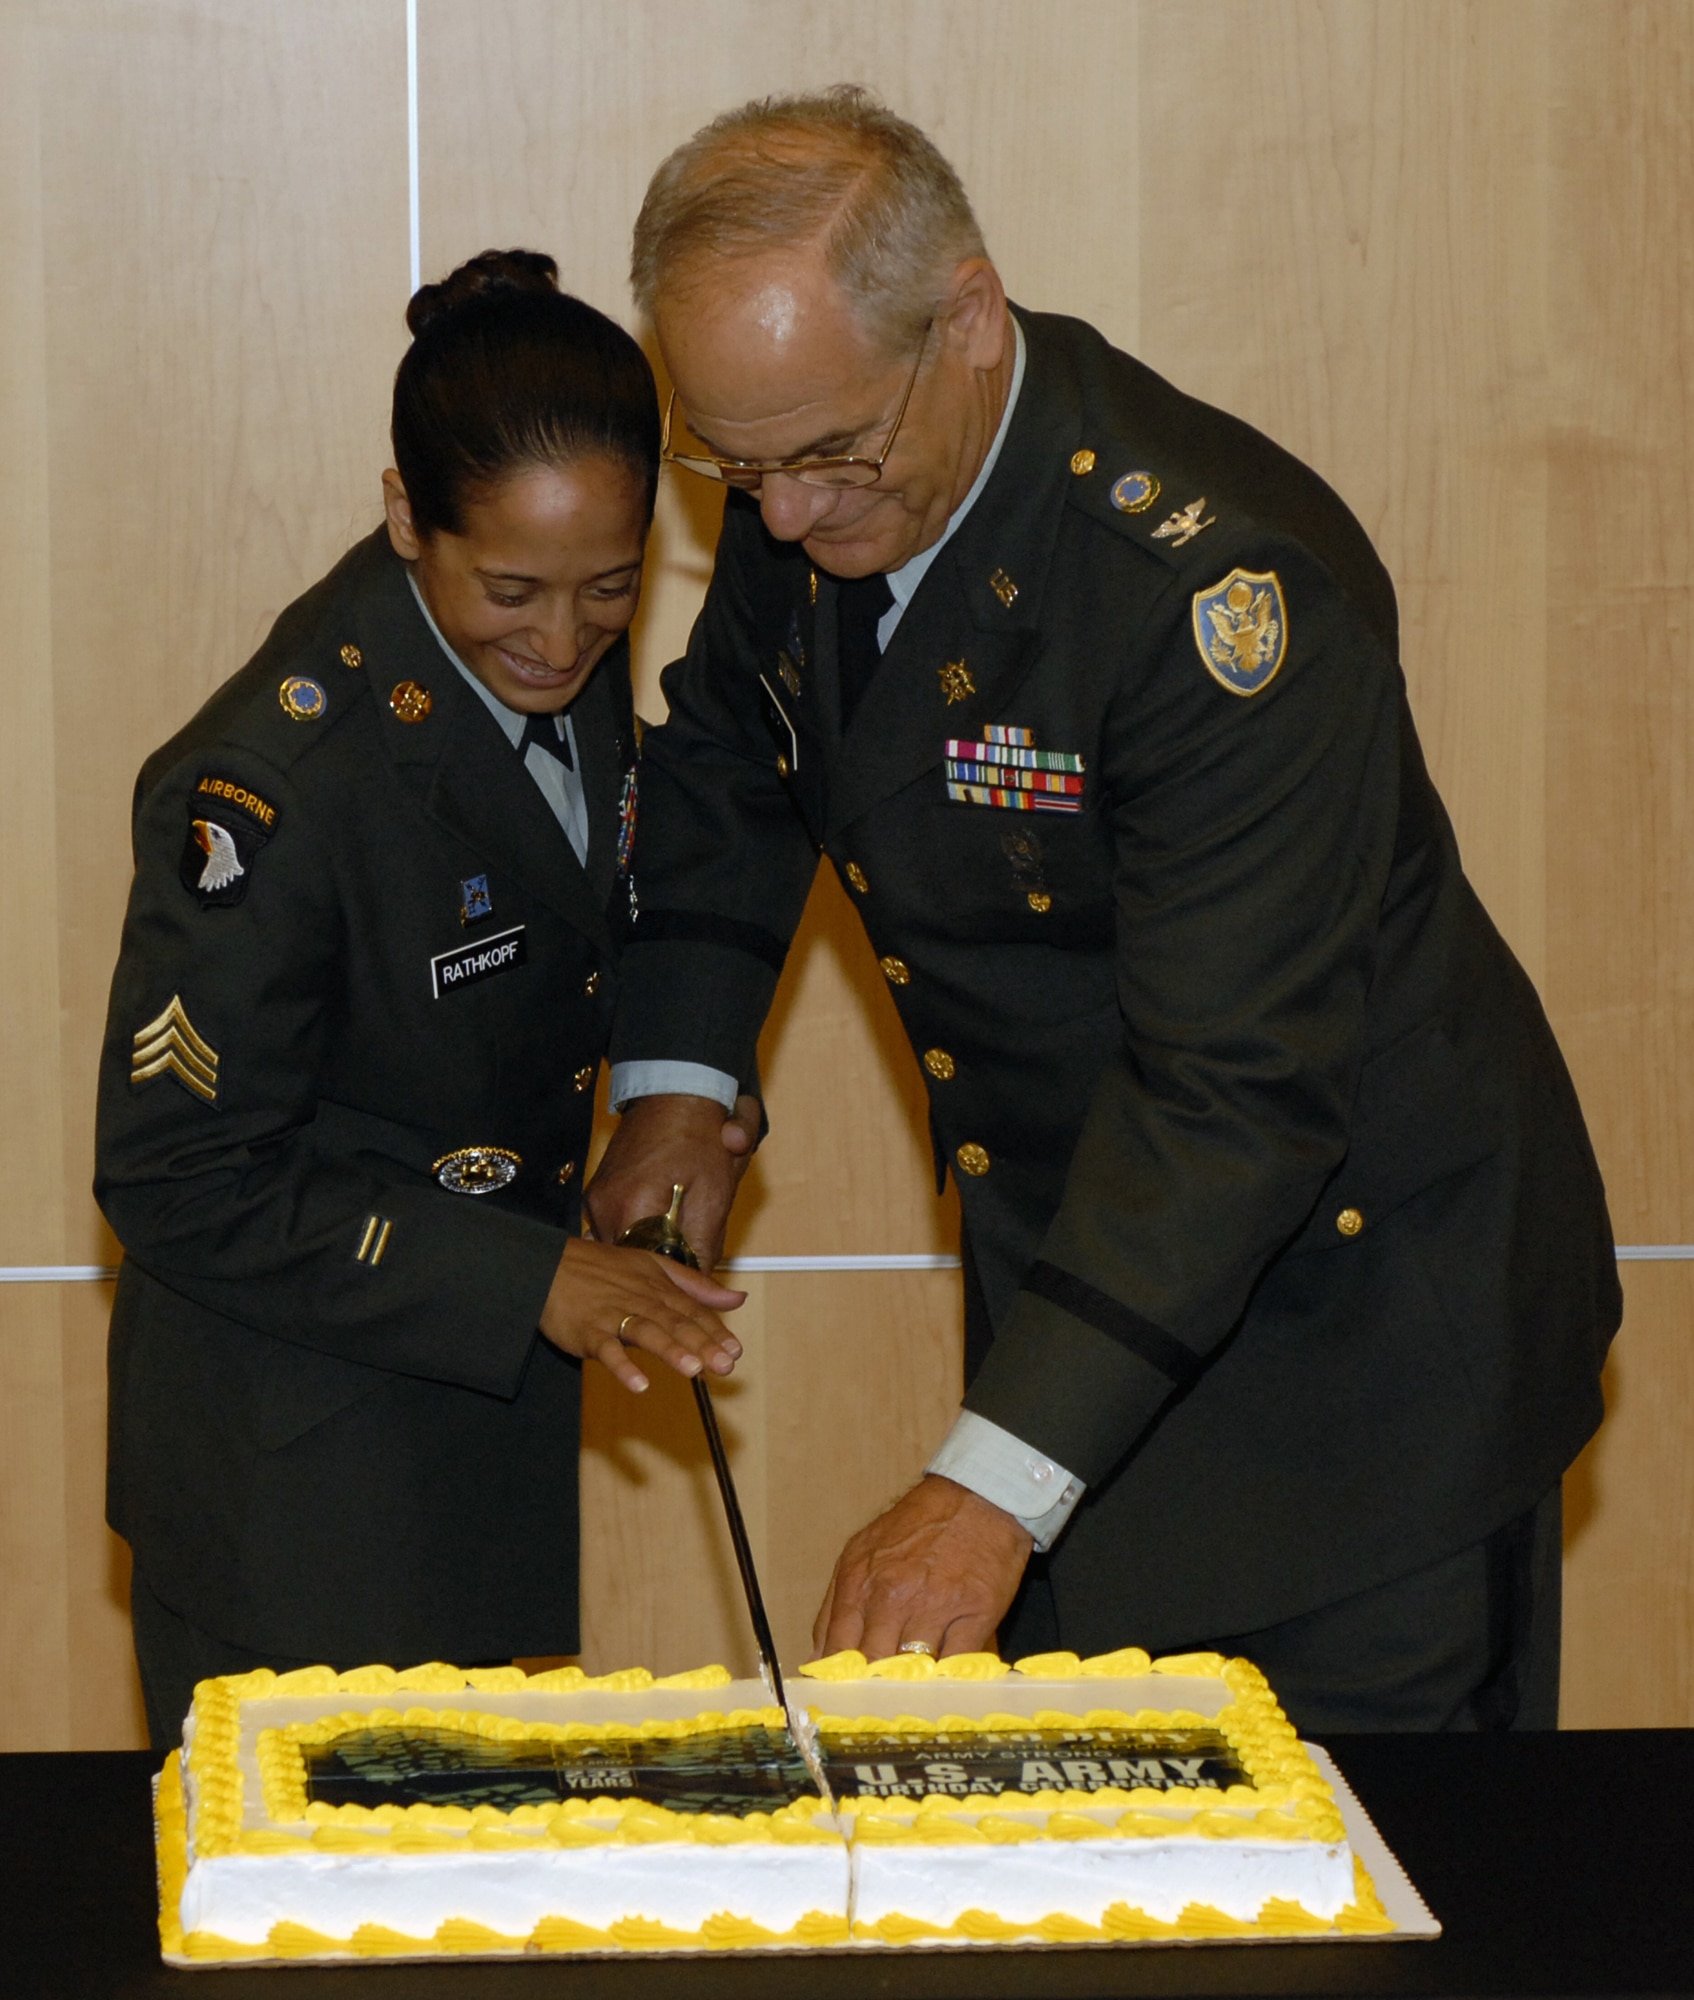 The Defense Intelligence Agency celebrated the U.S. Army’s 232nd birthday June 13 with the tradition of the most senior and junior DIA soldier making a toast and cutting the birthday cake with a ceremonial sword. Sgt. Cristin Rathkopf, left, born in 1986, and Col. Alan Witkin, right, born in 1942, did the honors. Gen. George Casey, Army chief of staff, participated in the events and was the guest speaker during DIA’s celebration on Bolling at the Defense Intelligence Analysis Center. (U.S. Air Force photo by Senior Airman Jaclyn McDonald)